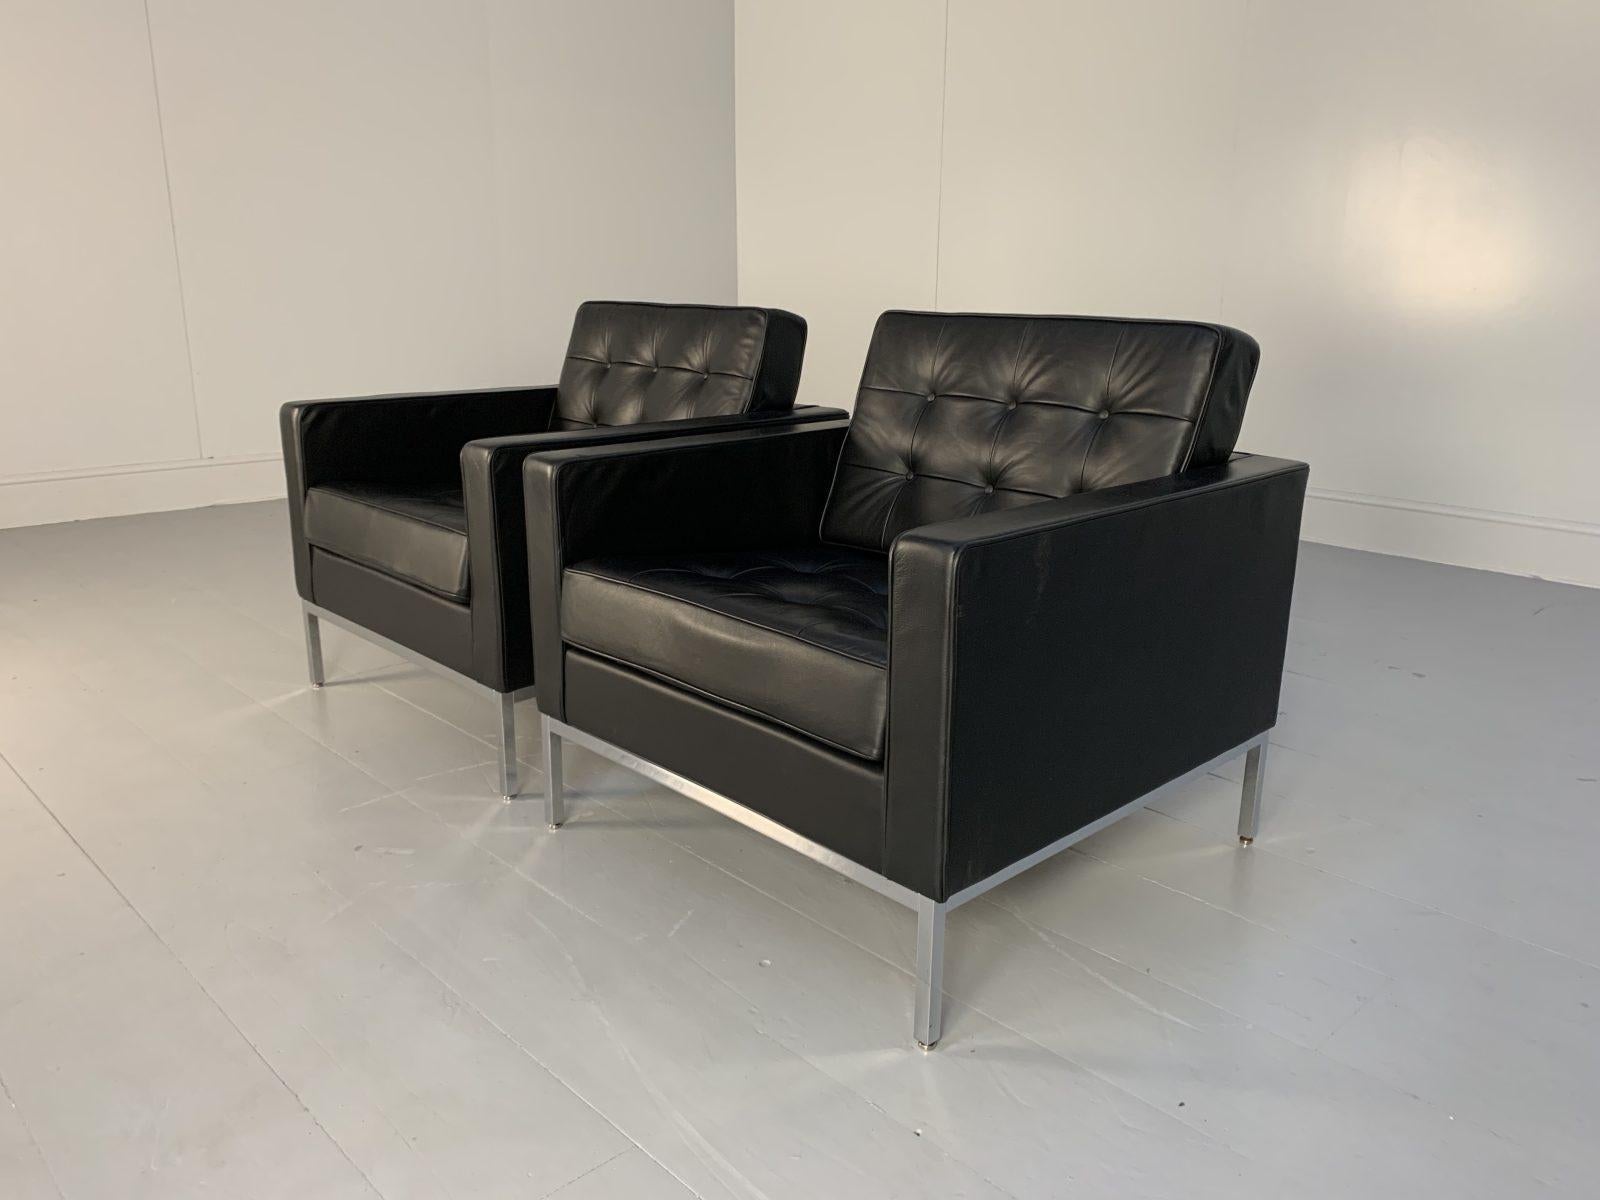 Contemporary Pair of Knoll Studio “Florence Knoll” Lounge Armchairs In Black “Volo” Leather For Sale